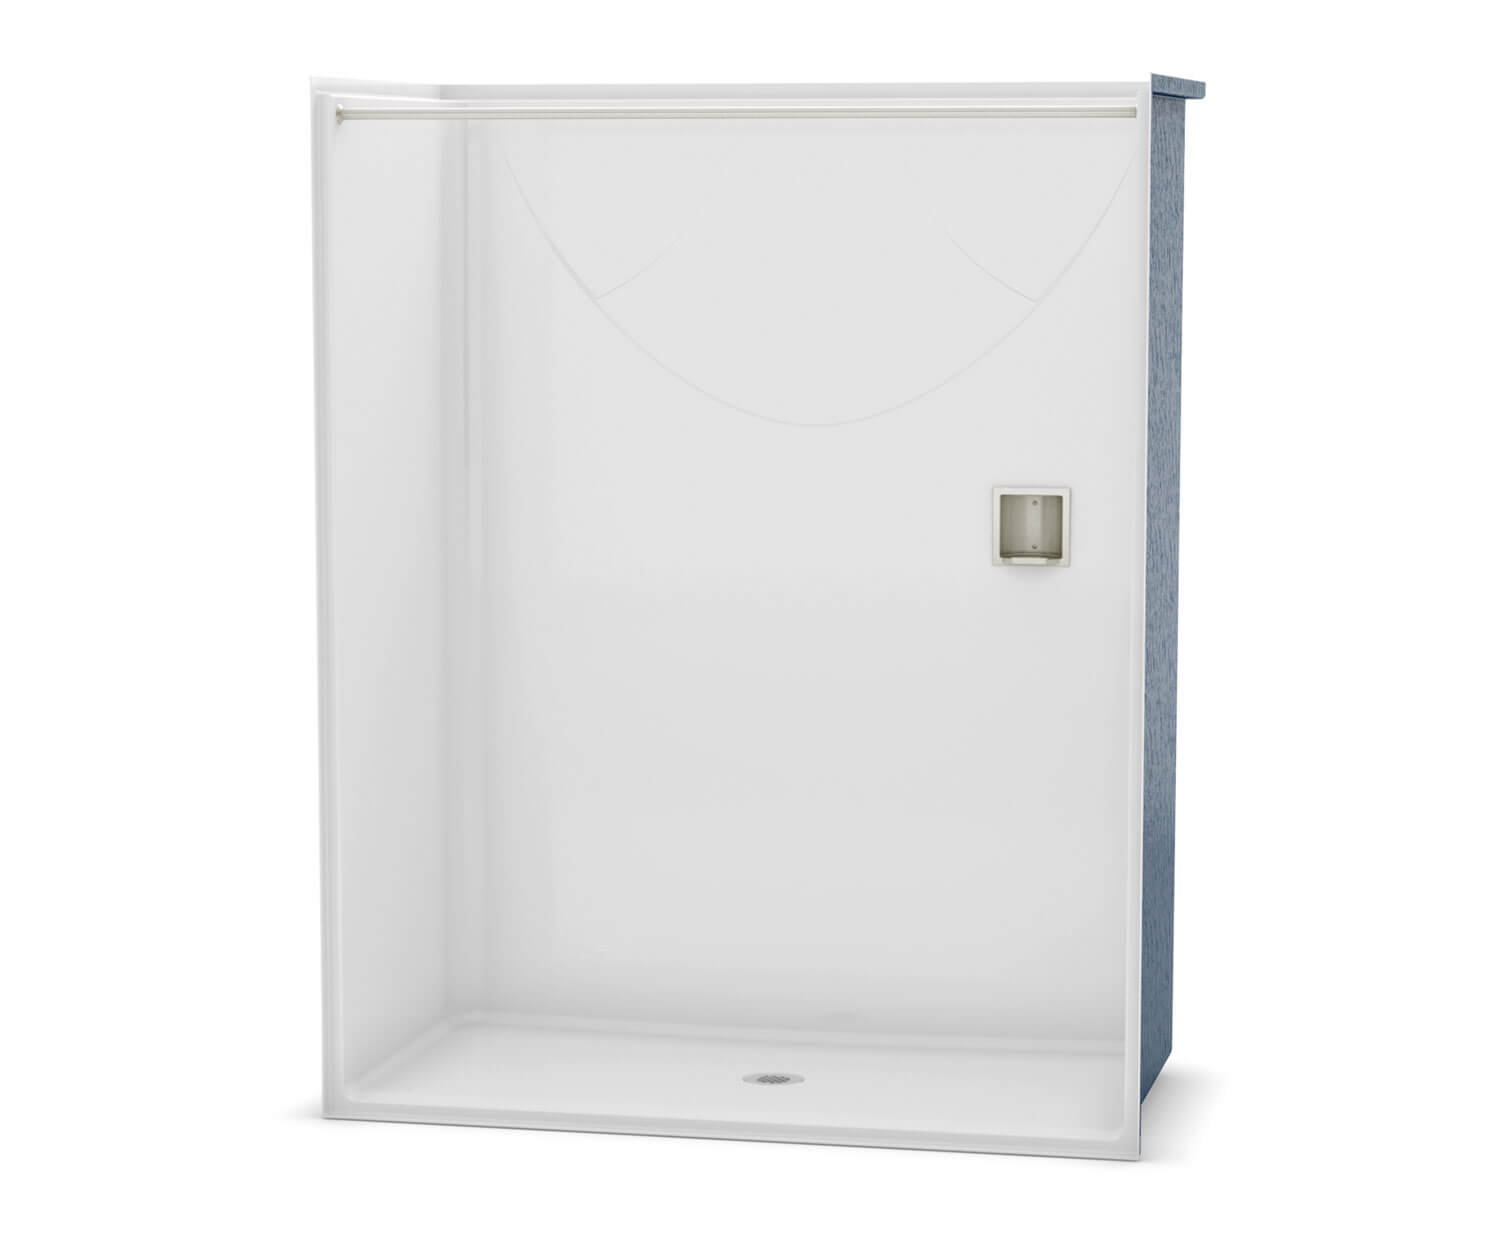 OPS-6030 AcrylX Alcove Center Drain One-Piece Shower in White 